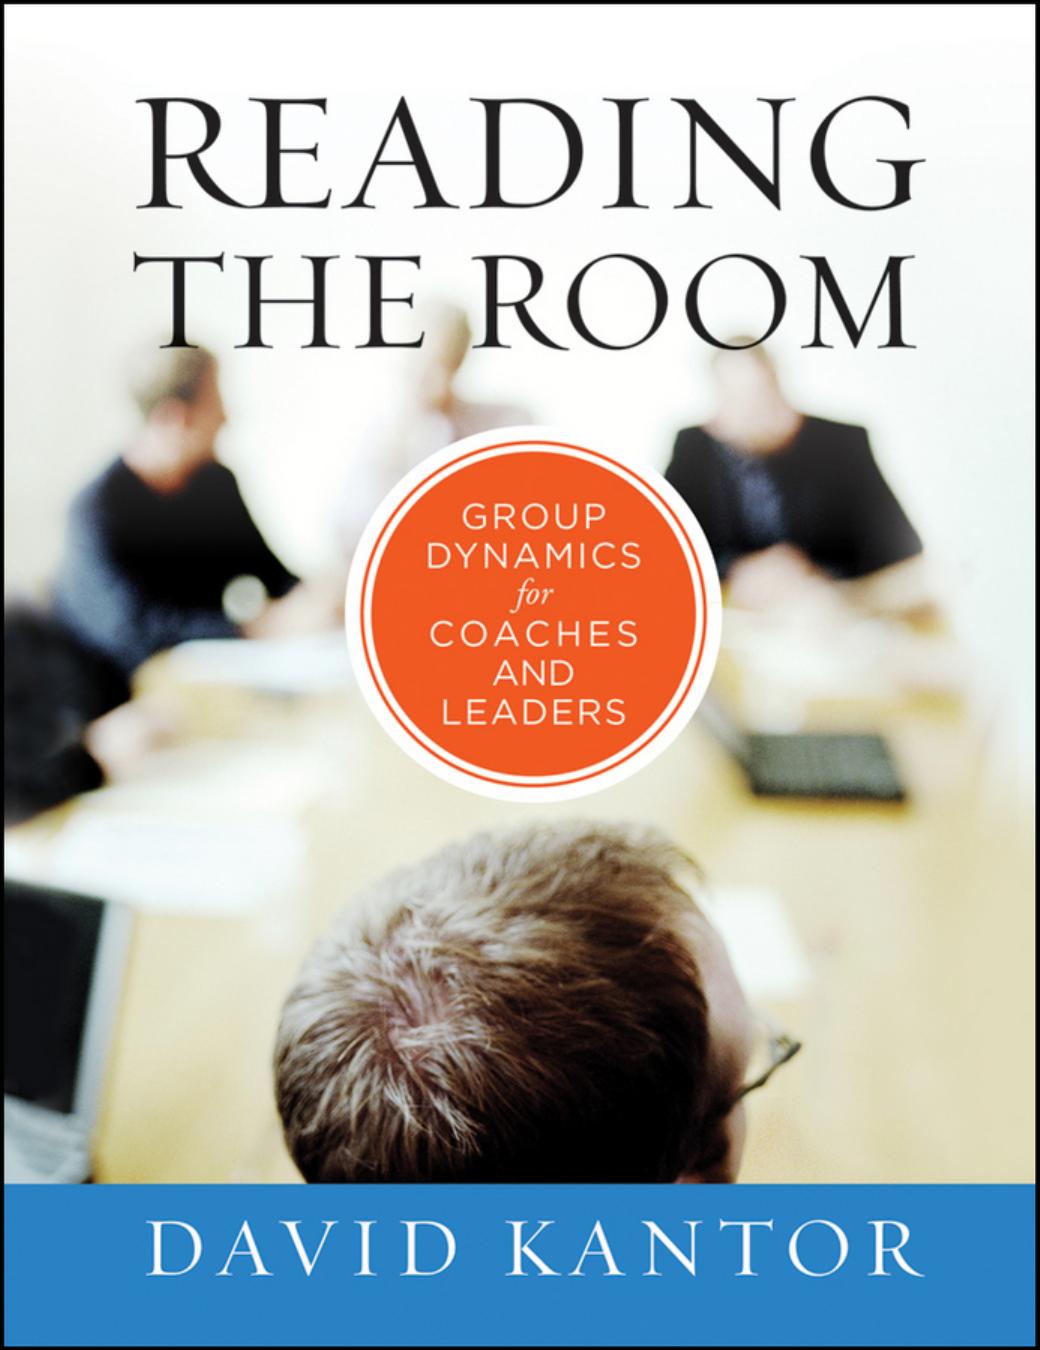 Reading the Room by David Kantor